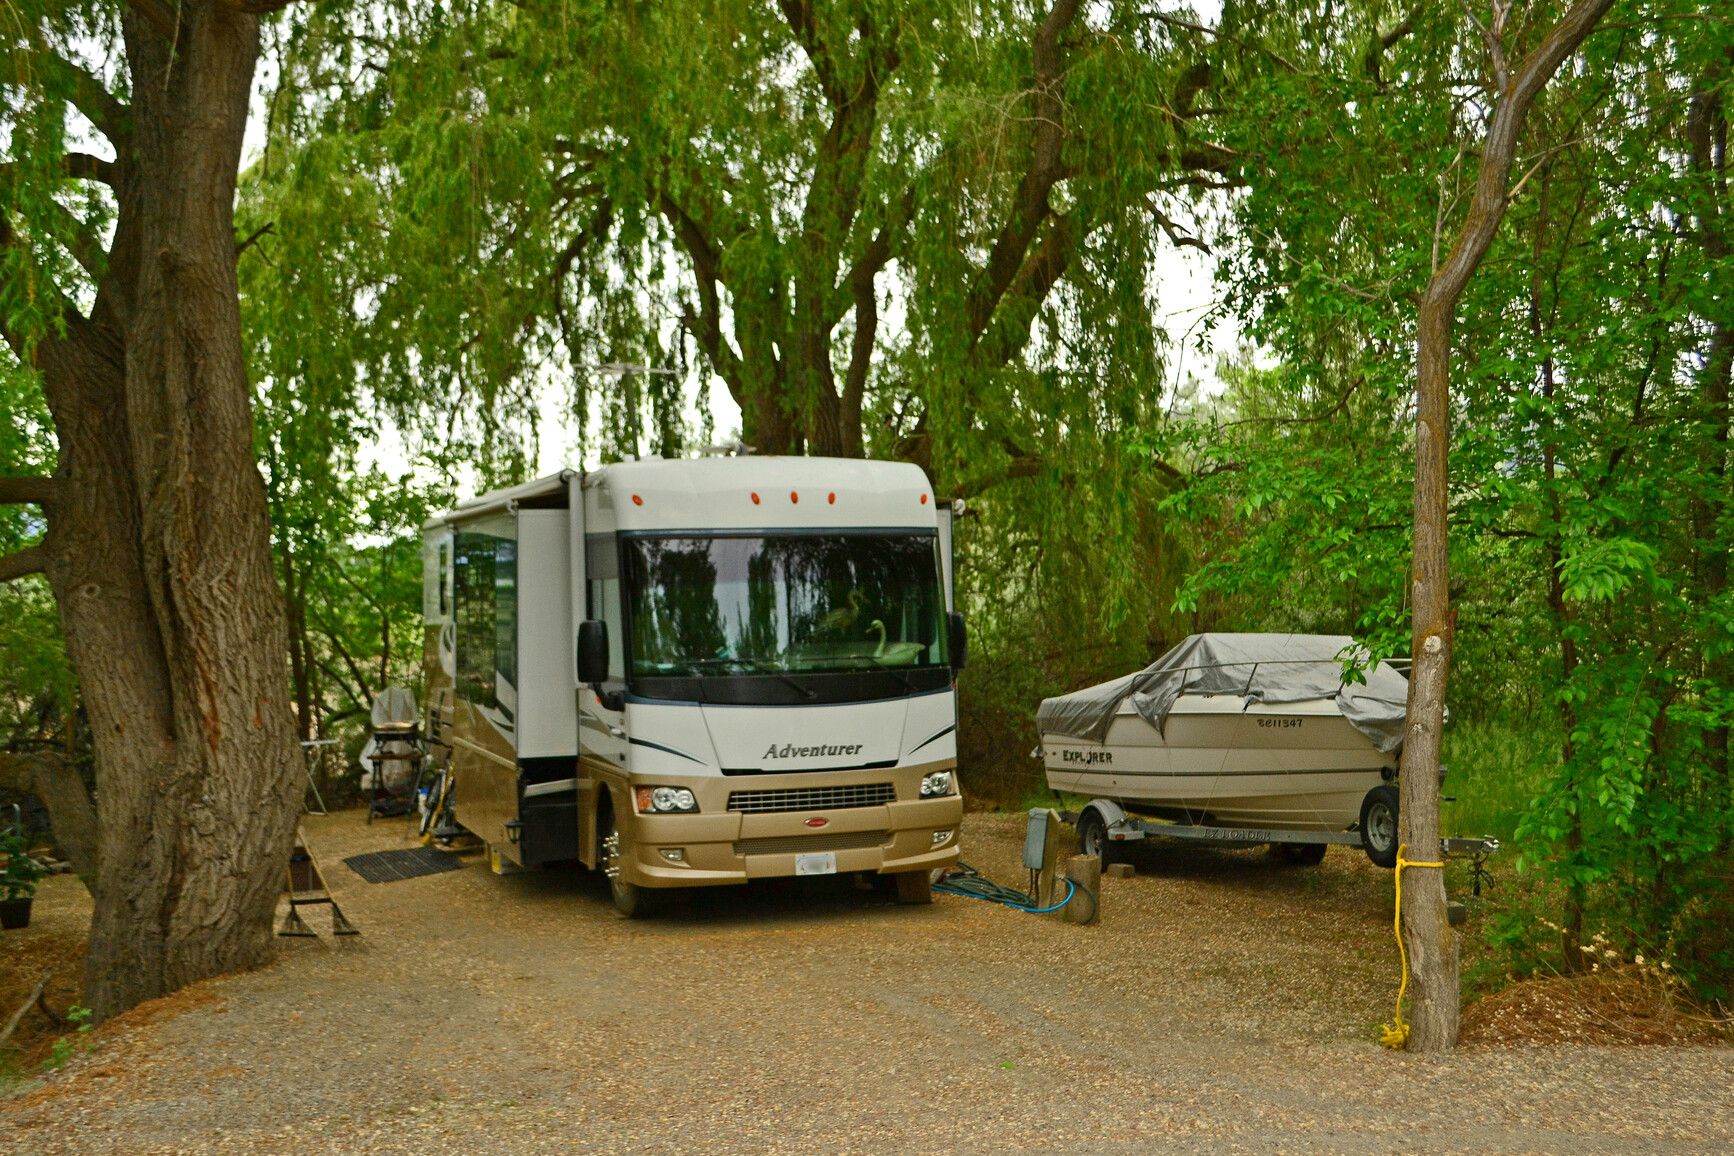 sẁiẁs Park has campsites that easily accommodate an RV and a boat.